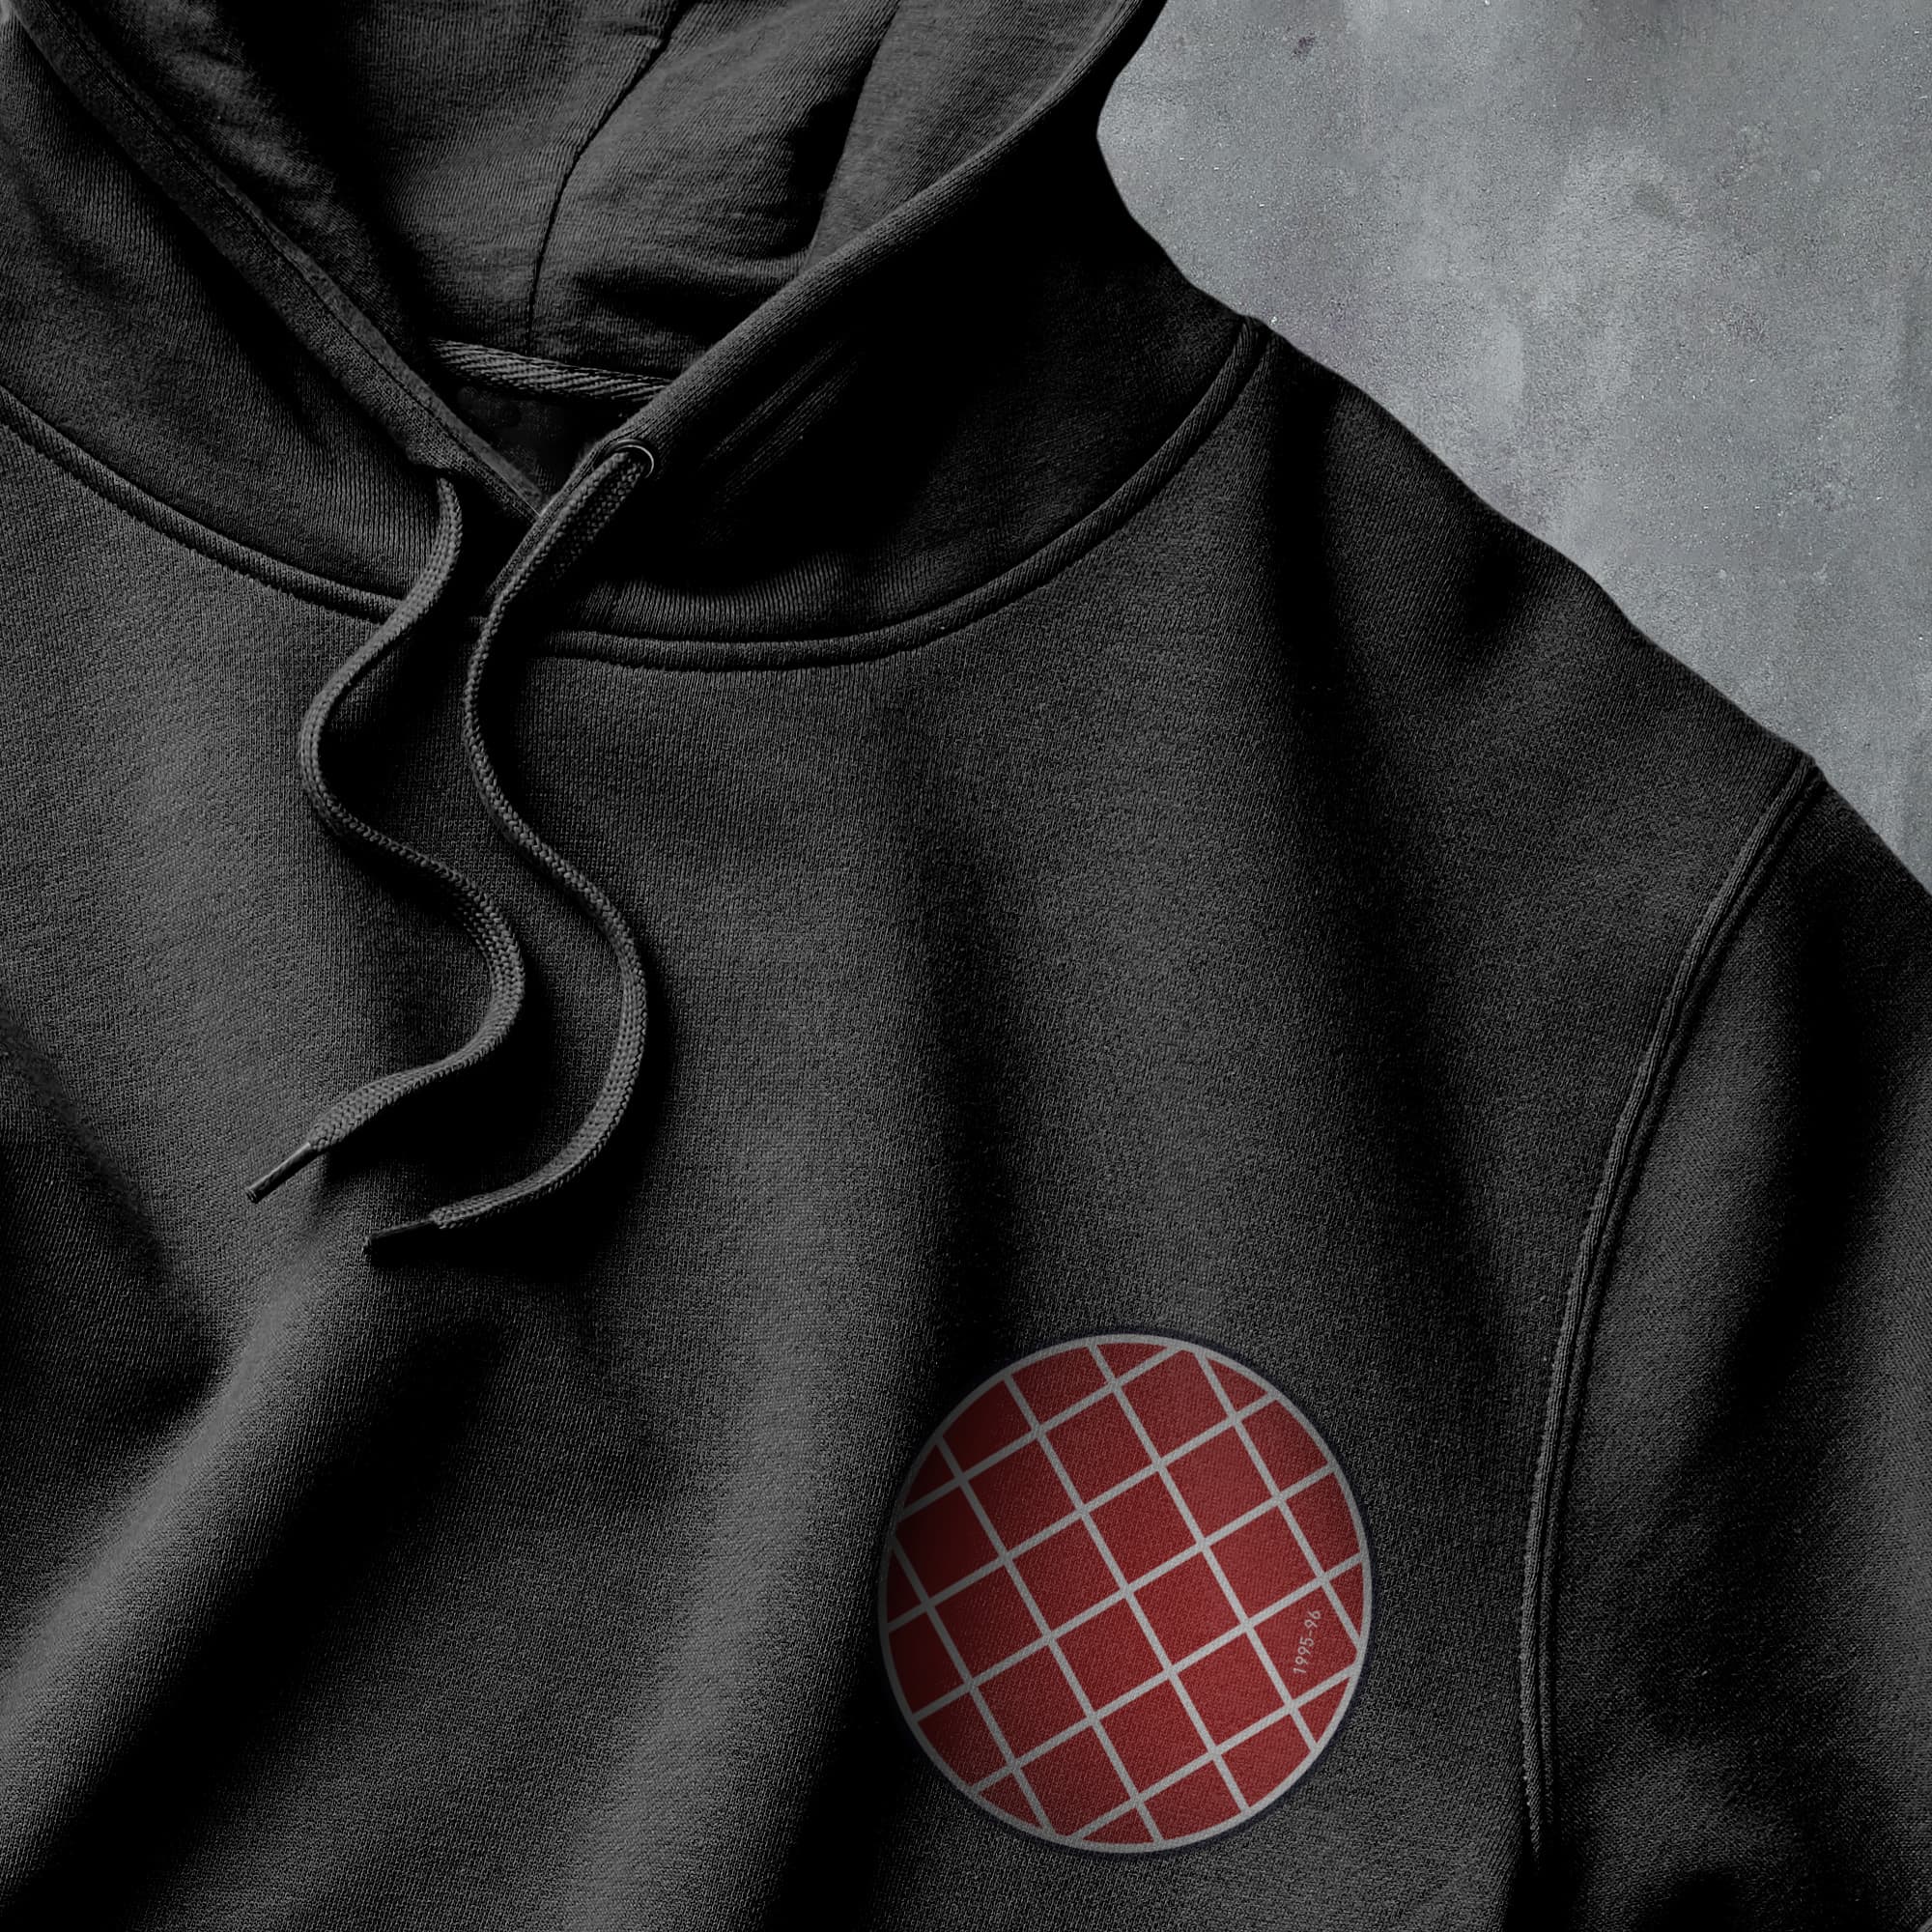 a black hoodie with a red and white circle on it